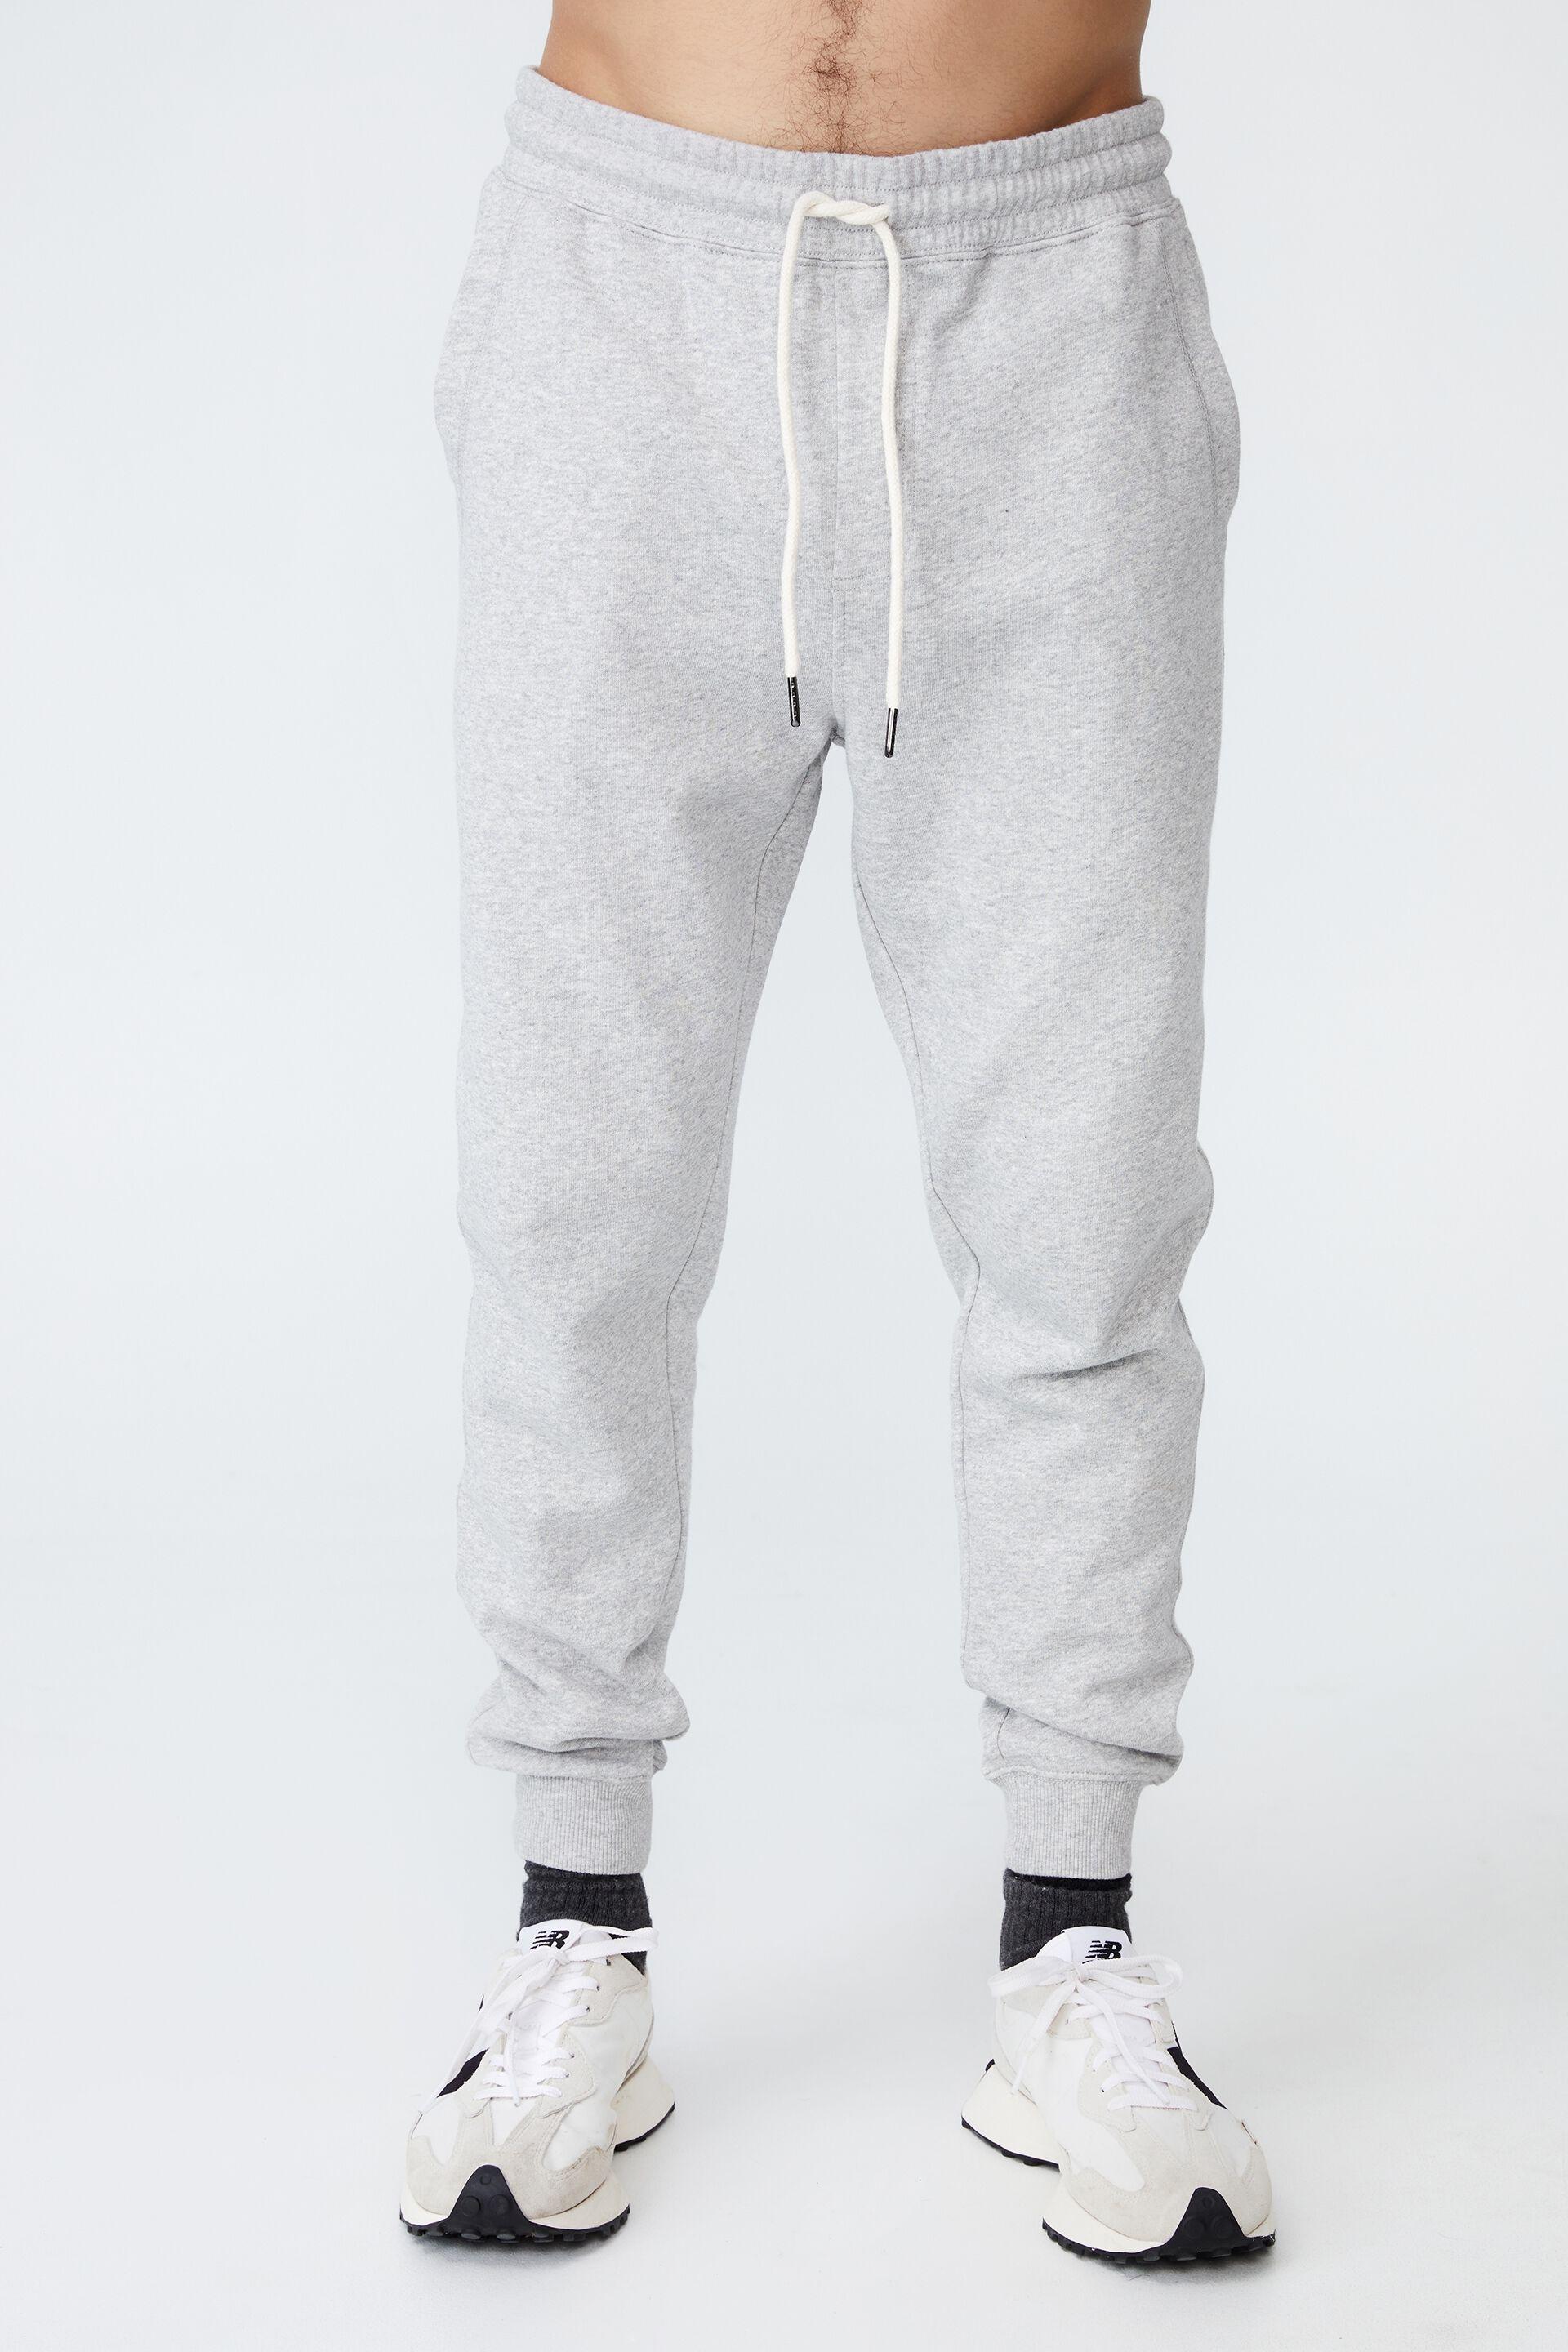 Trippy slim trackie - peached grey marle Cotton On Pants & Chinos ...